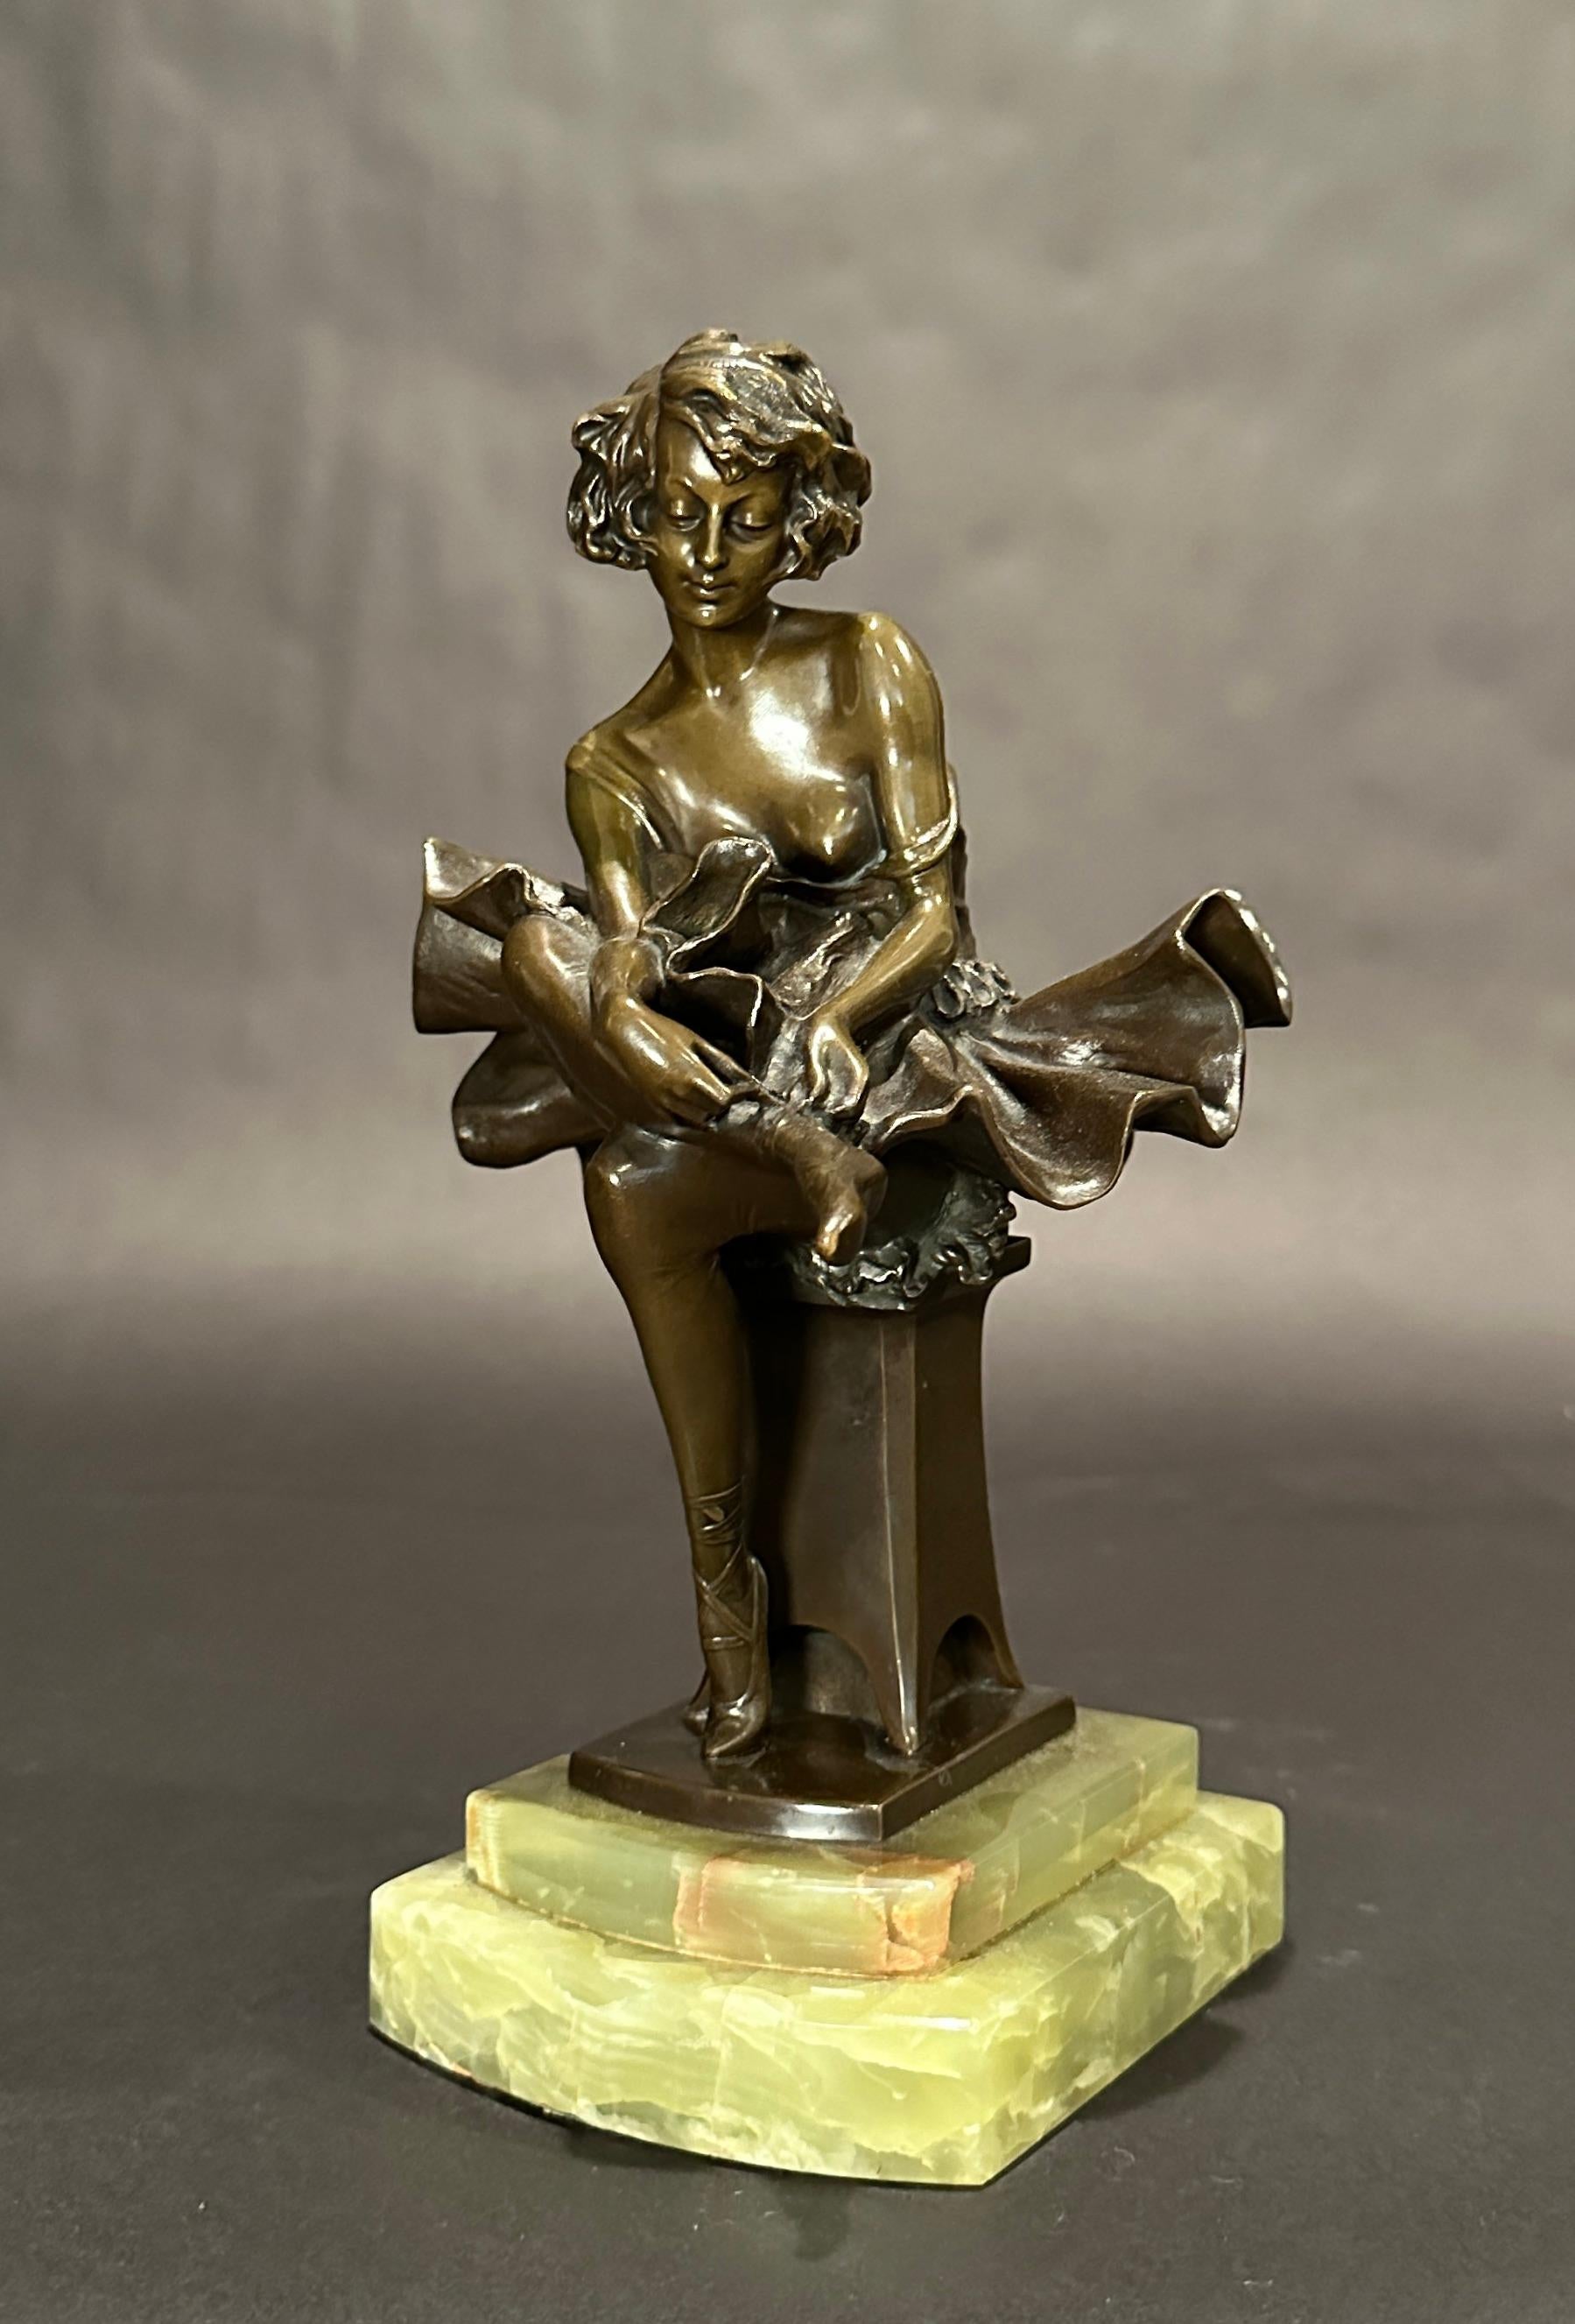 Period Art Deco bronze sculpture by Josef Lorenzo (1852-1950) of a beautiful ballerina seated with a pleasant gaze, in traditional outfit of tutu and tying her pointe shoes in preparation for practice or performance. Rich brown patina mounted on an